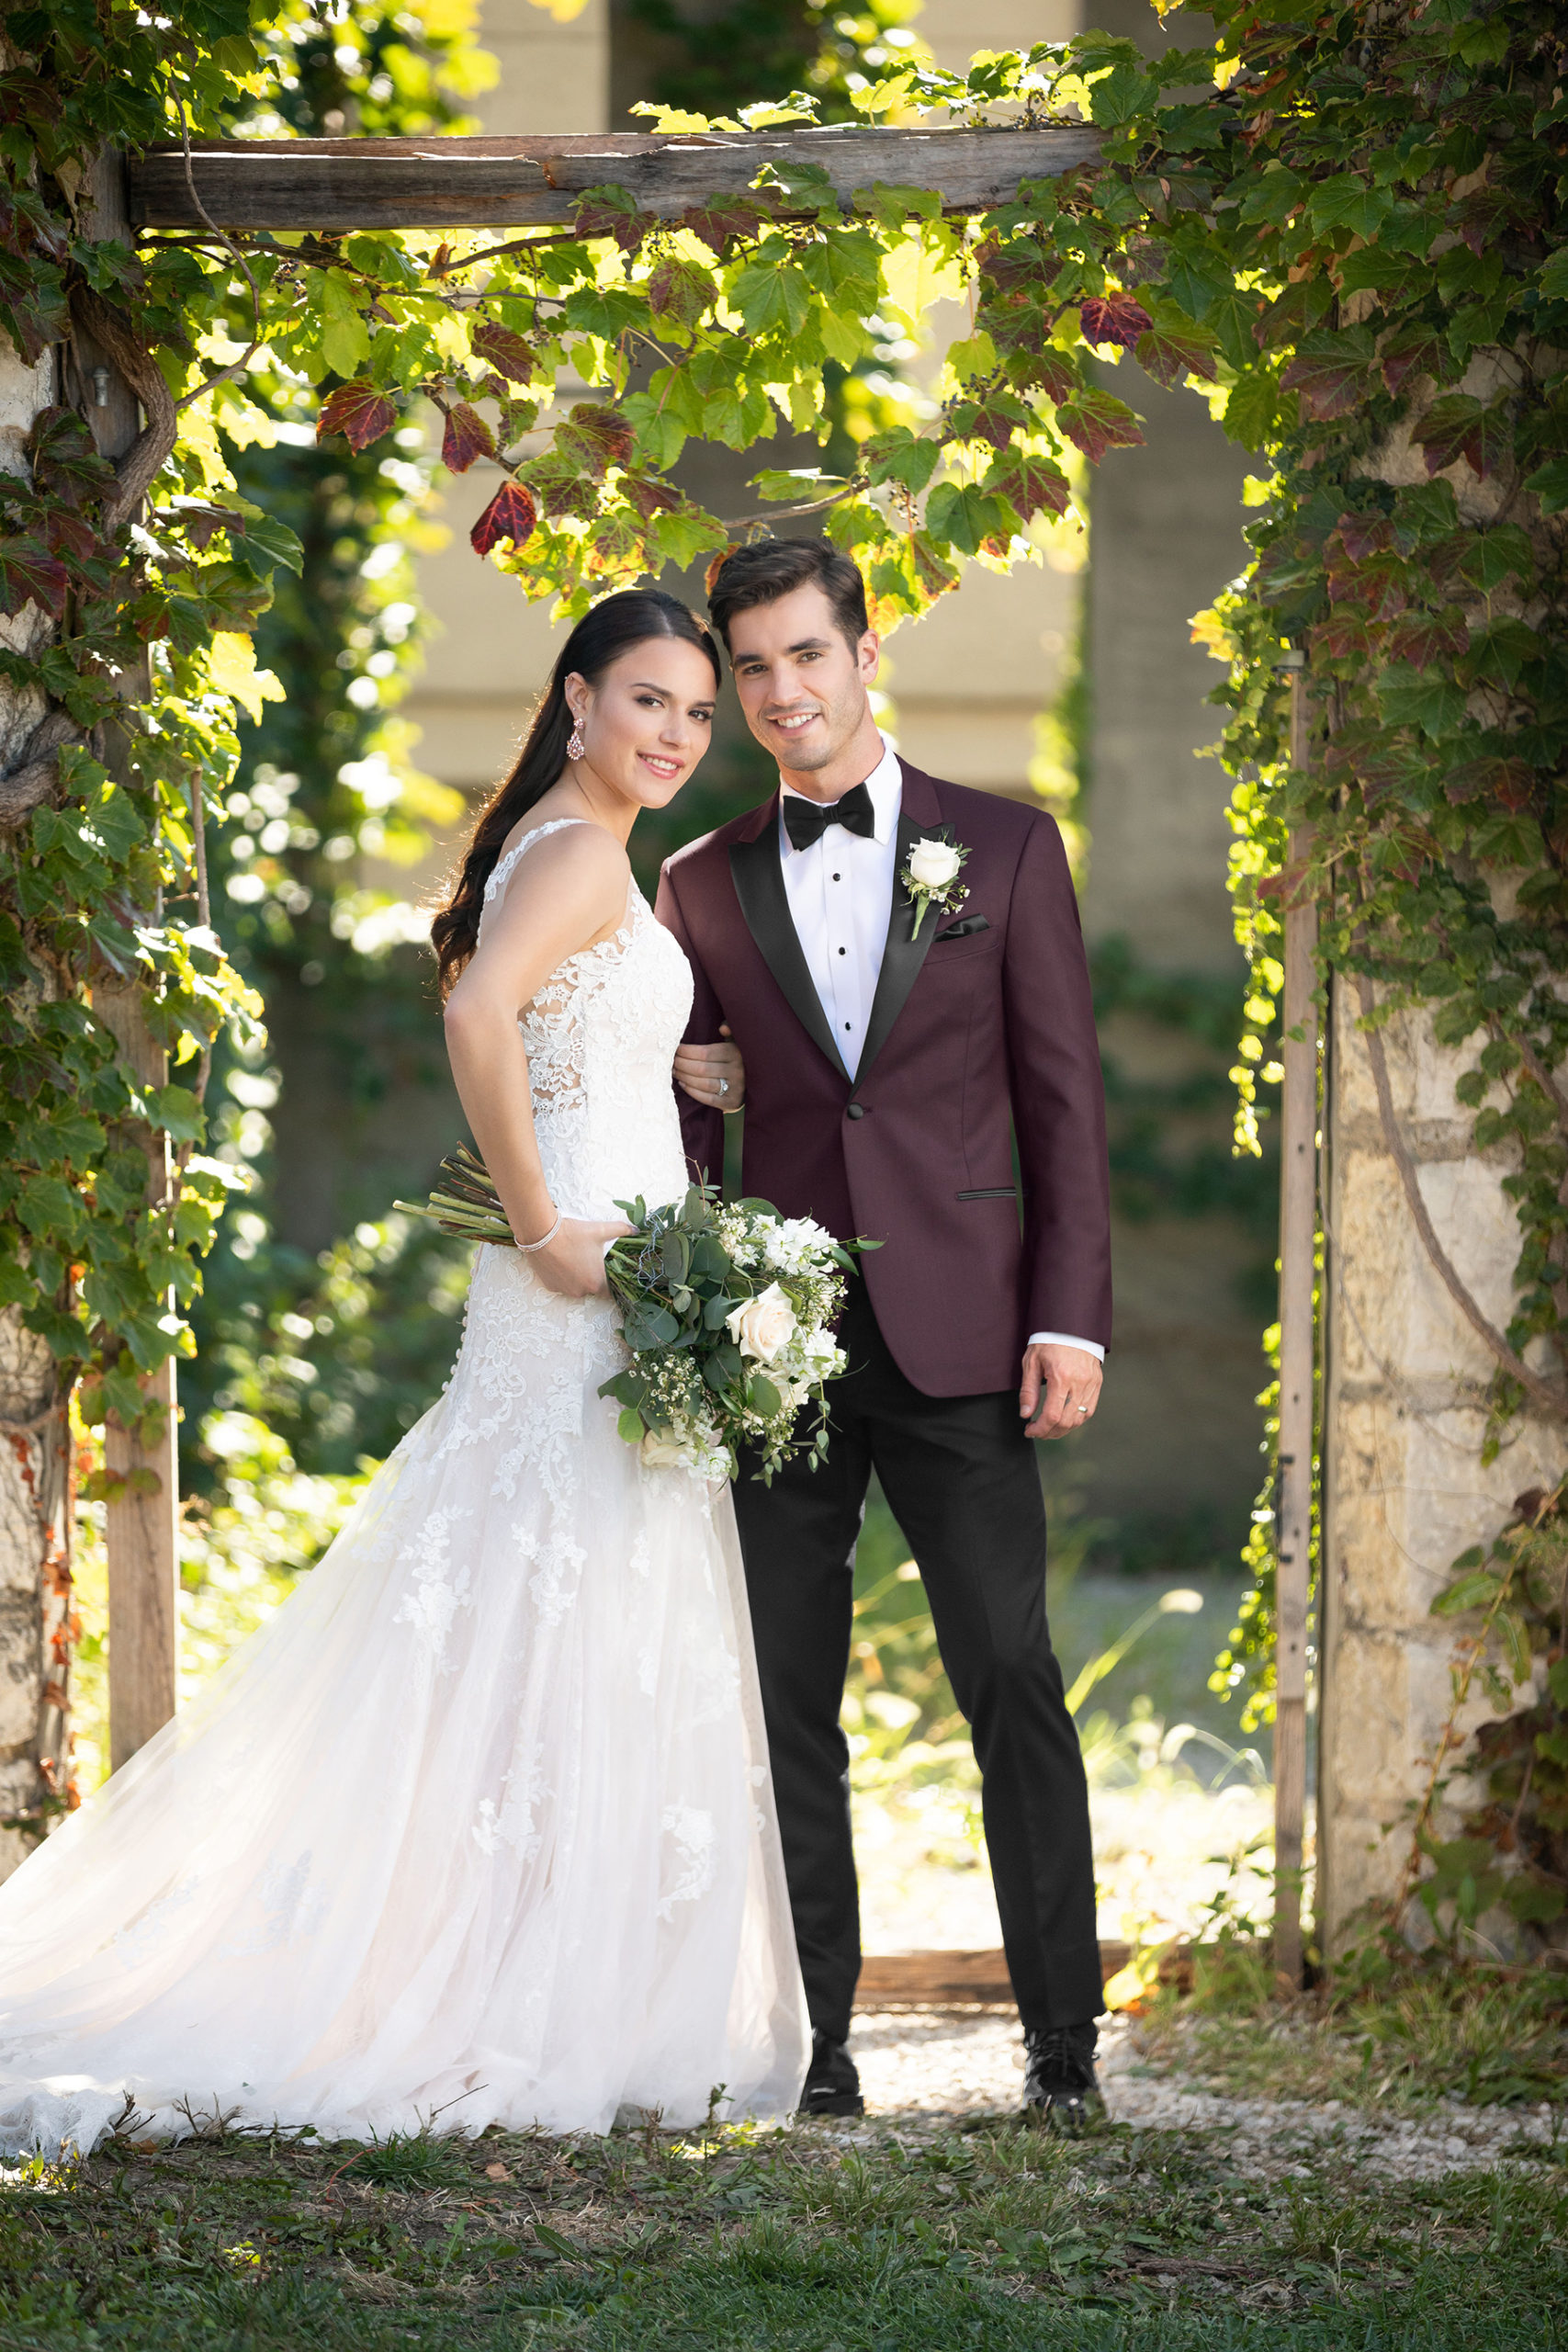 A wedding couple in elegant wedding suits, standing together outdoors. Green leaves create a beautiful natural backdrop